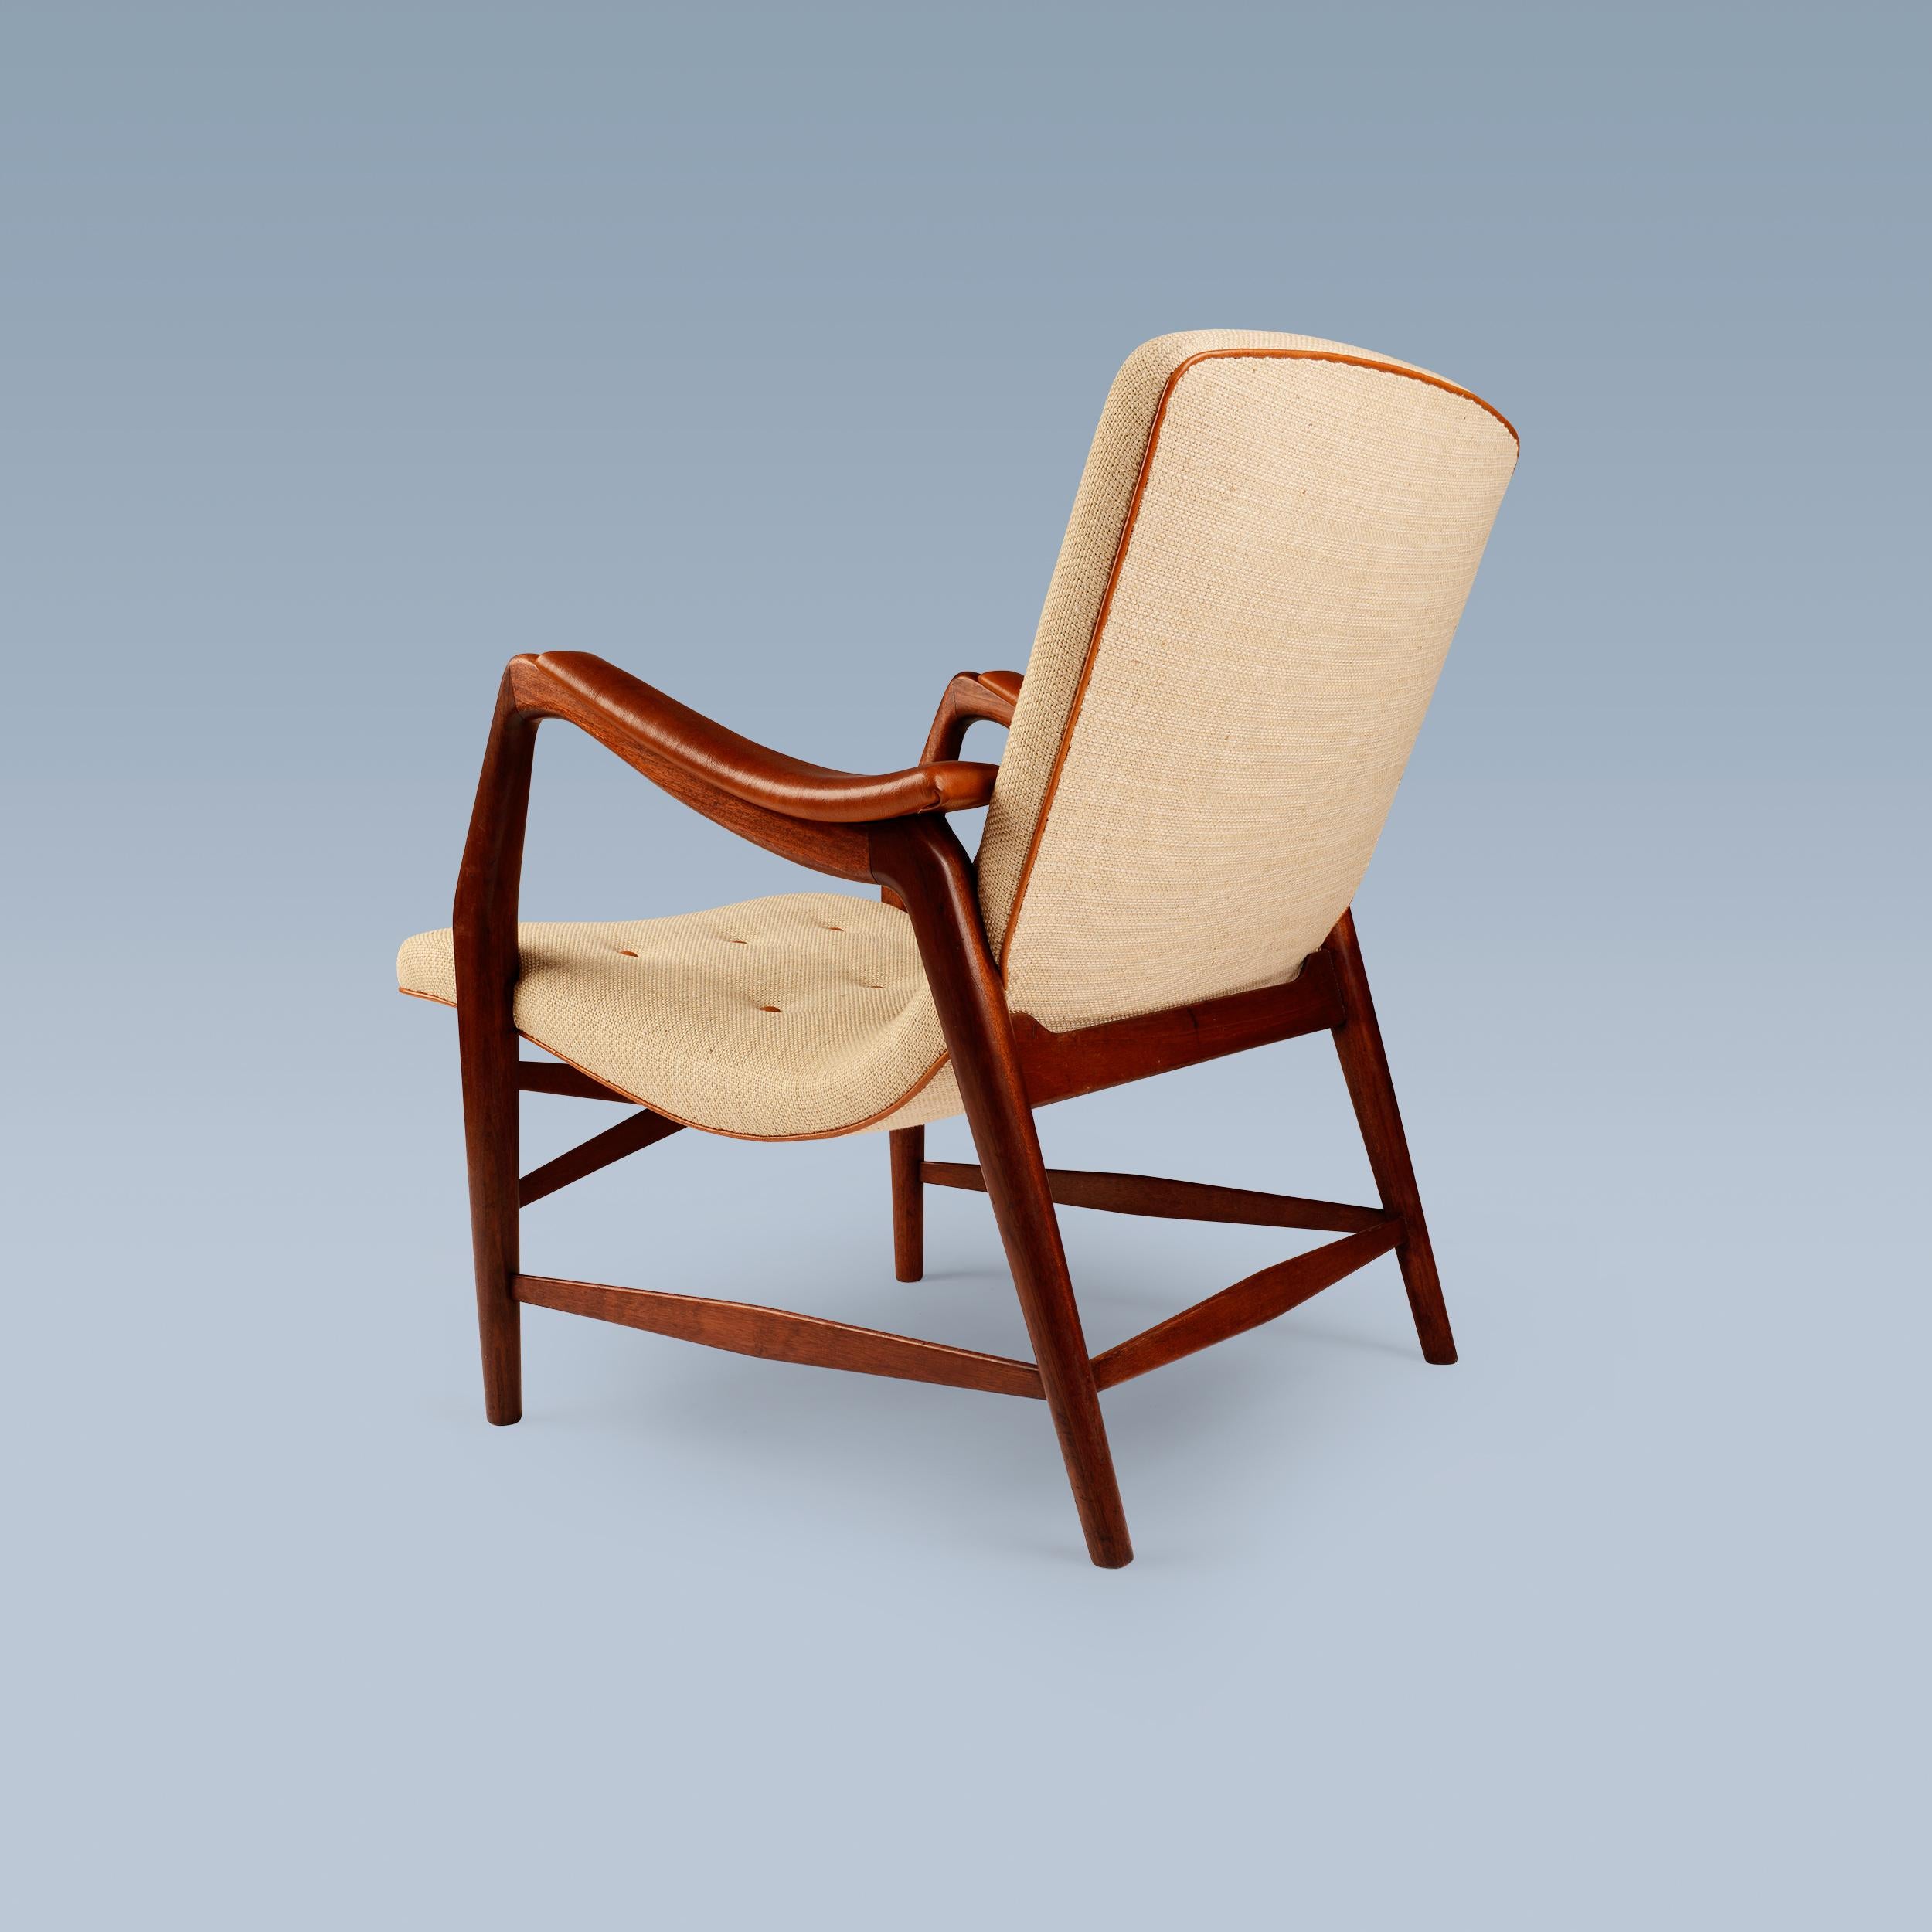 Danish Teak chair with curvy seat upholstered with light fabric and leather details For Sale